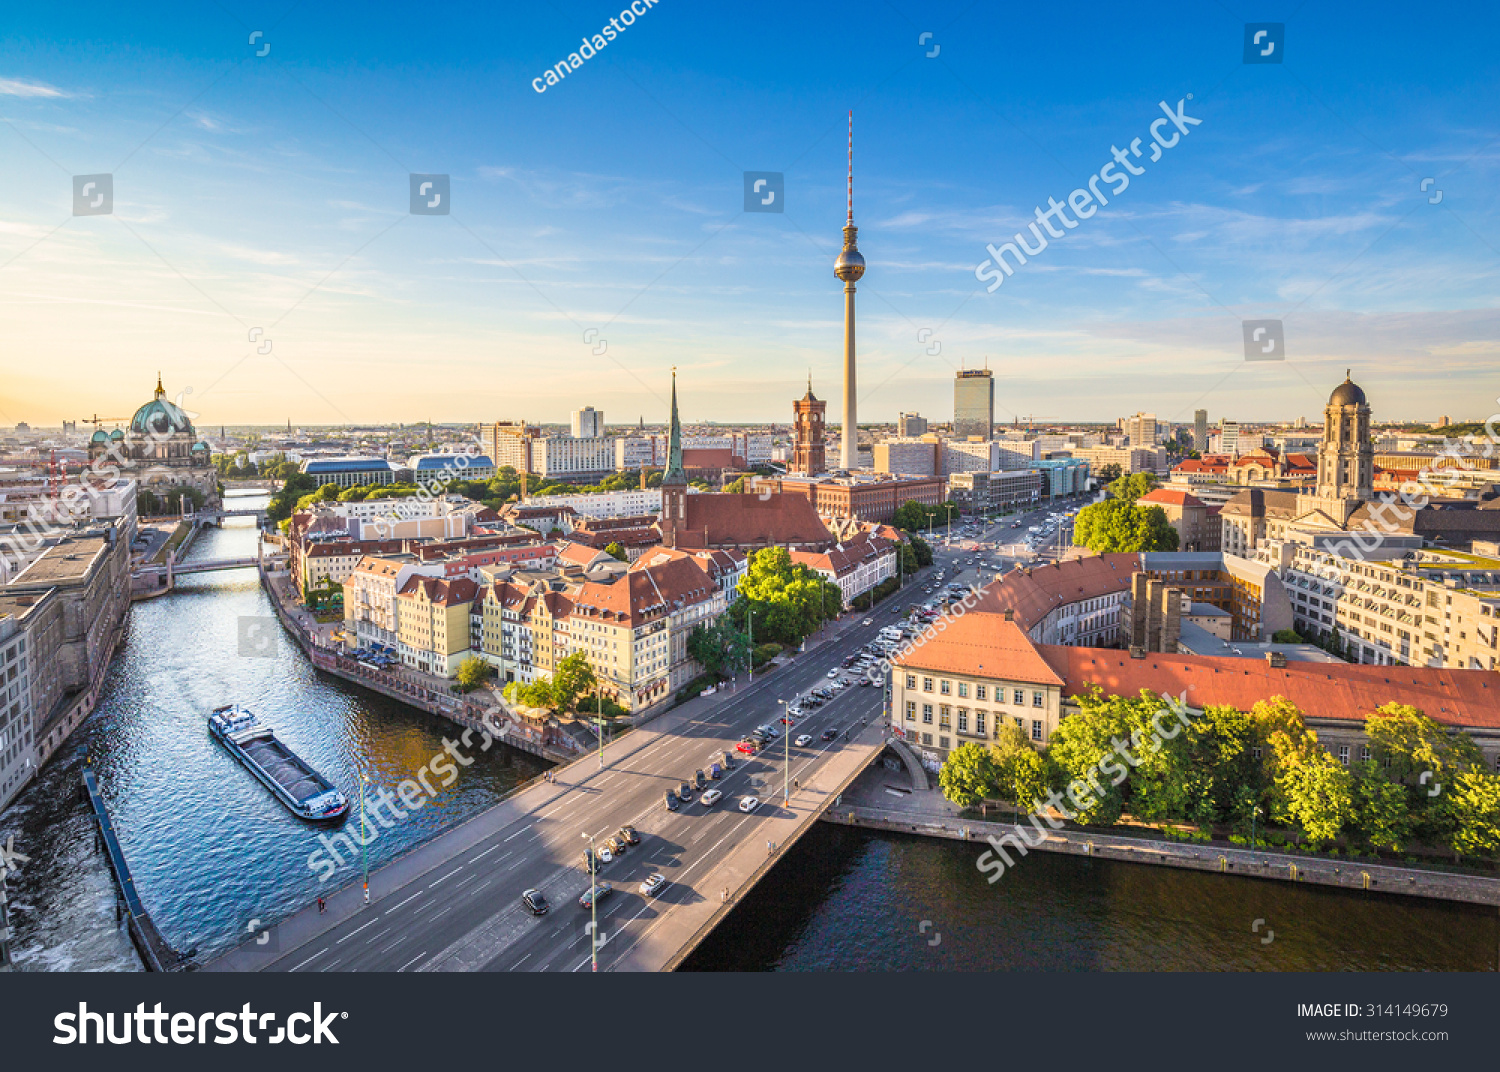 Aerial view of Berlin skyline and Spree river in beautiful evening light at sunset in summer, Germany #314149679